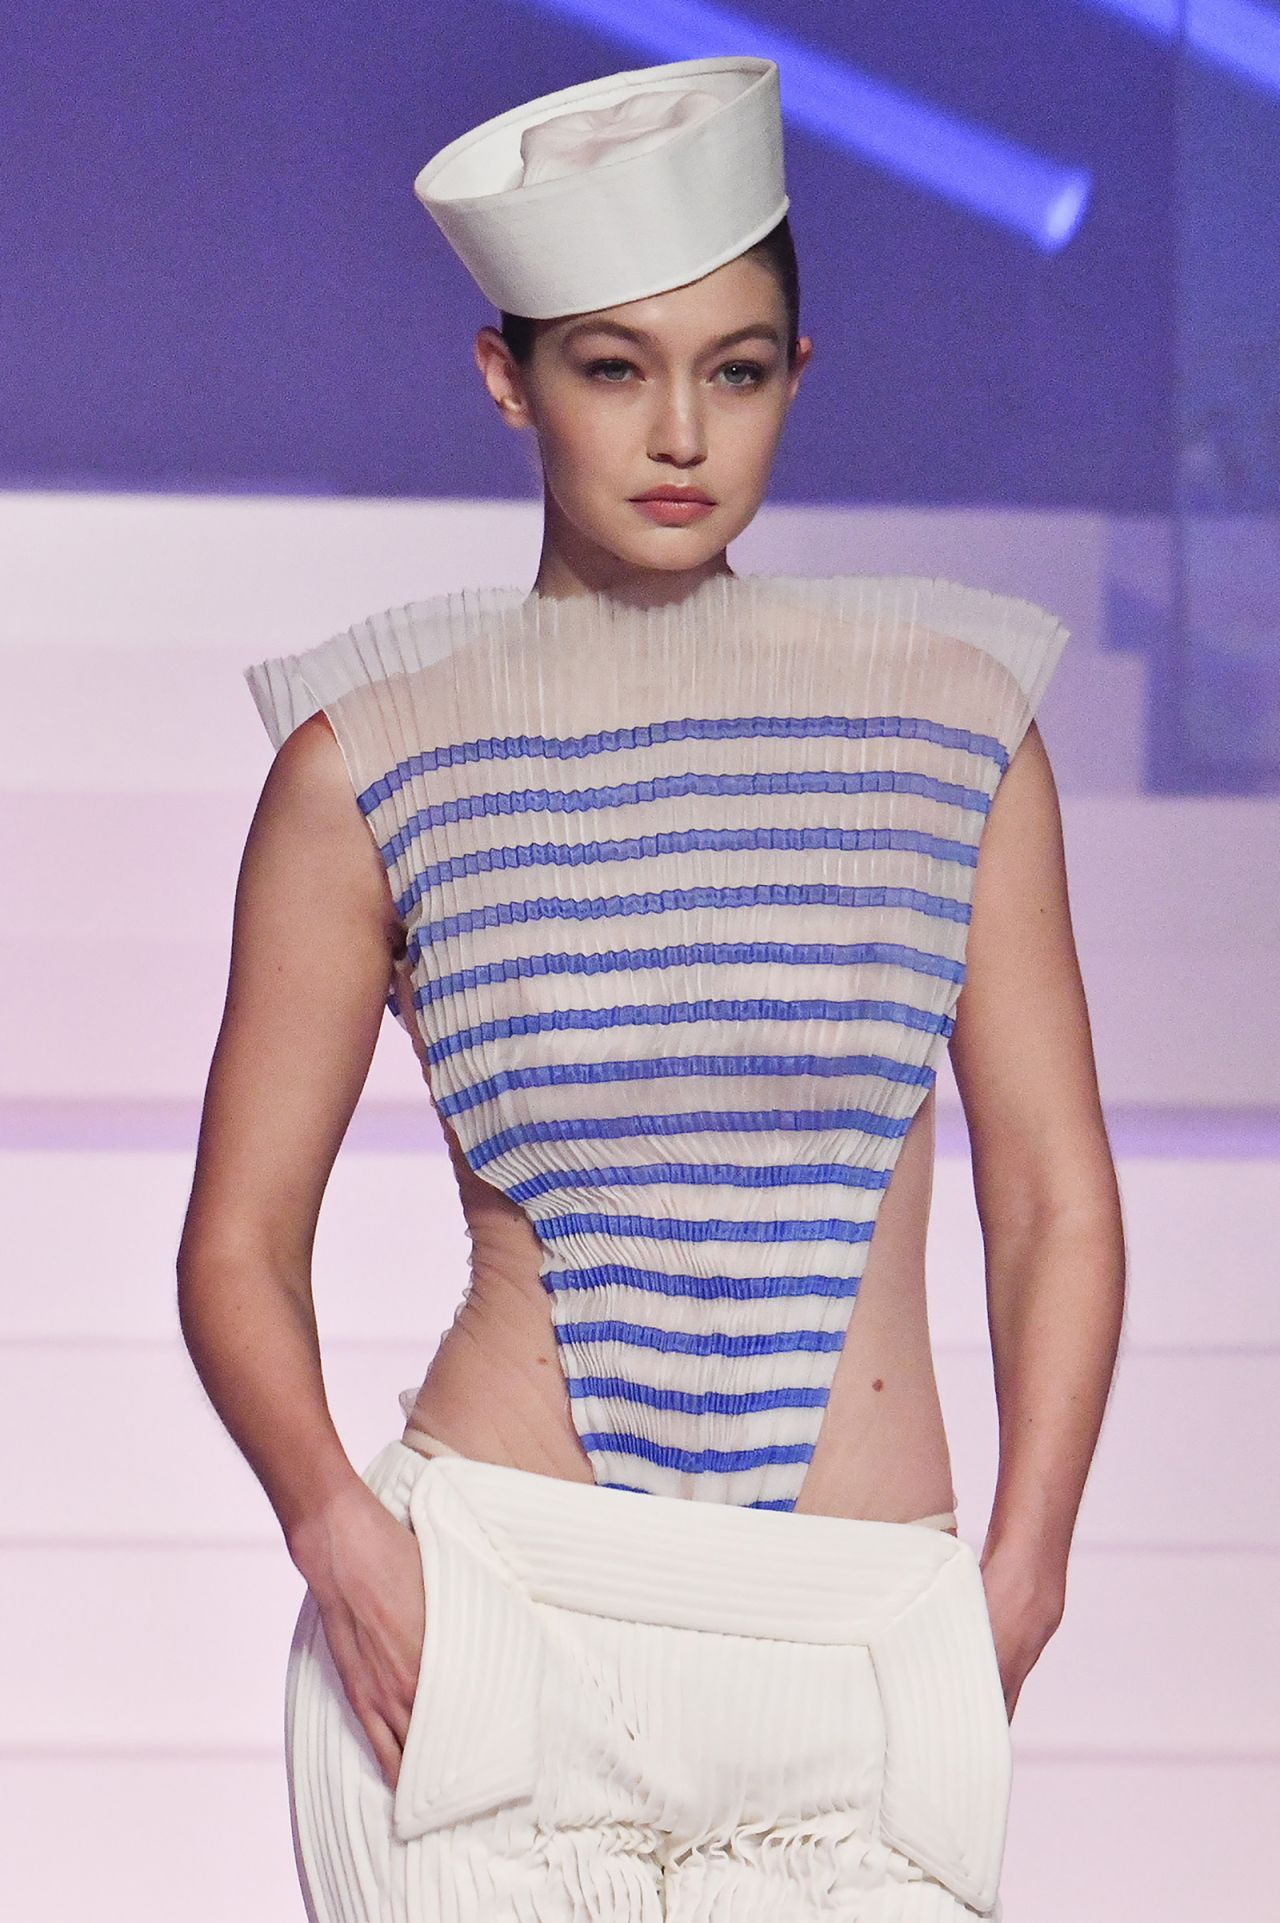 Gigi Hadid during the Jean-Paul Gaultier Haute Couture Spring/Summer 2020 fashion show.